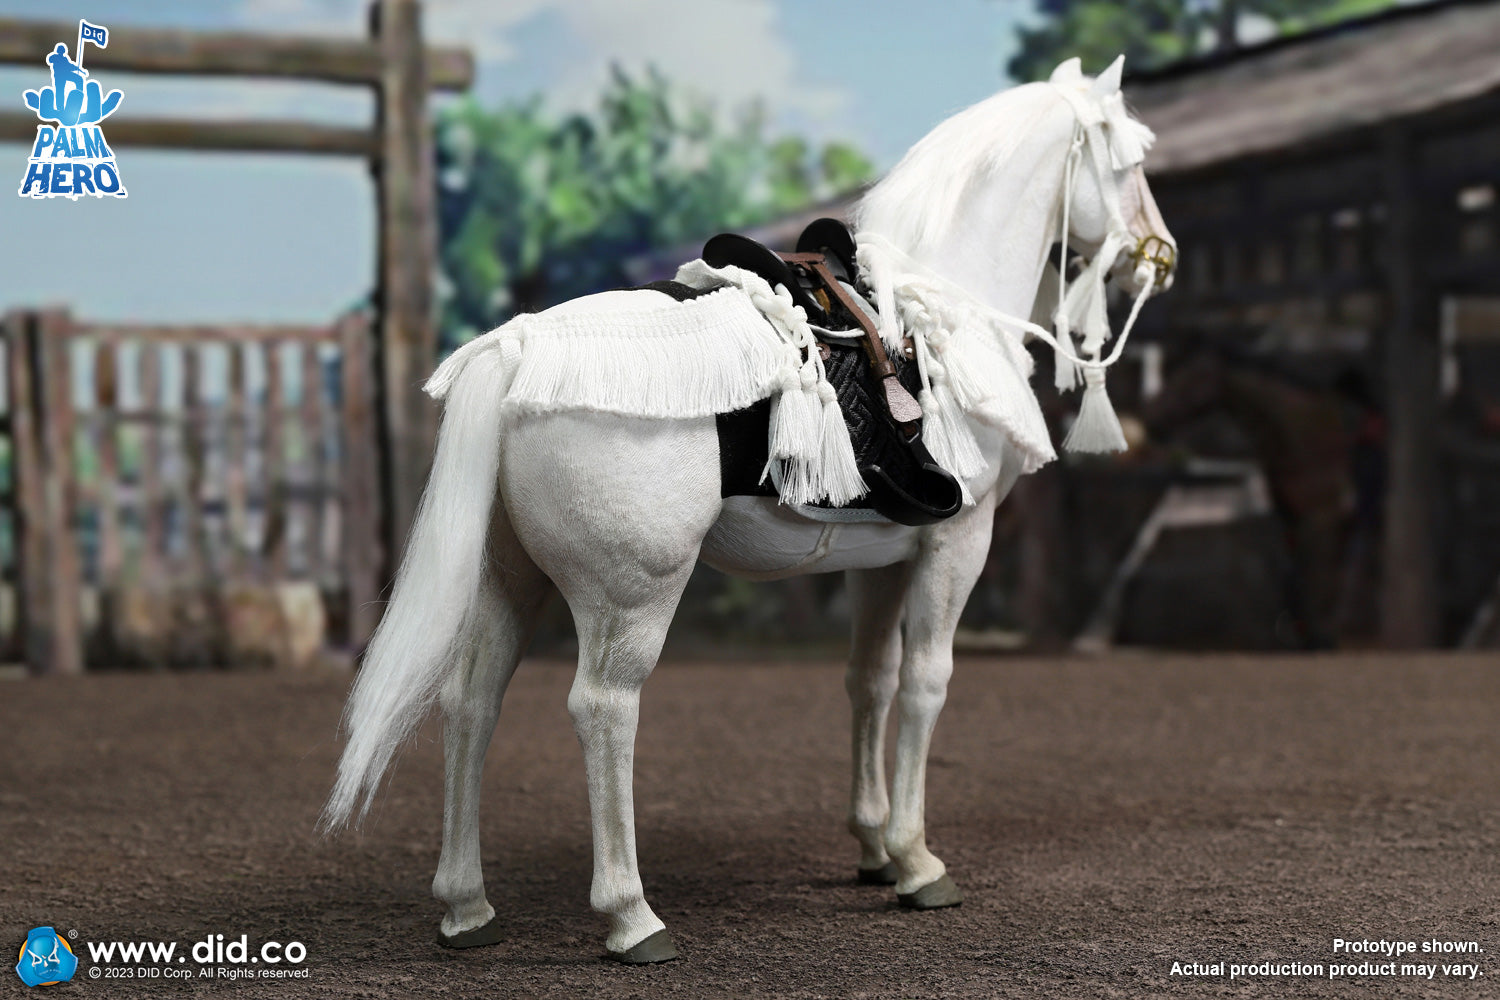 DiD - XH80021 - Palm Hero Series - White Horse (1/12 Scale) - Marvelous Toys